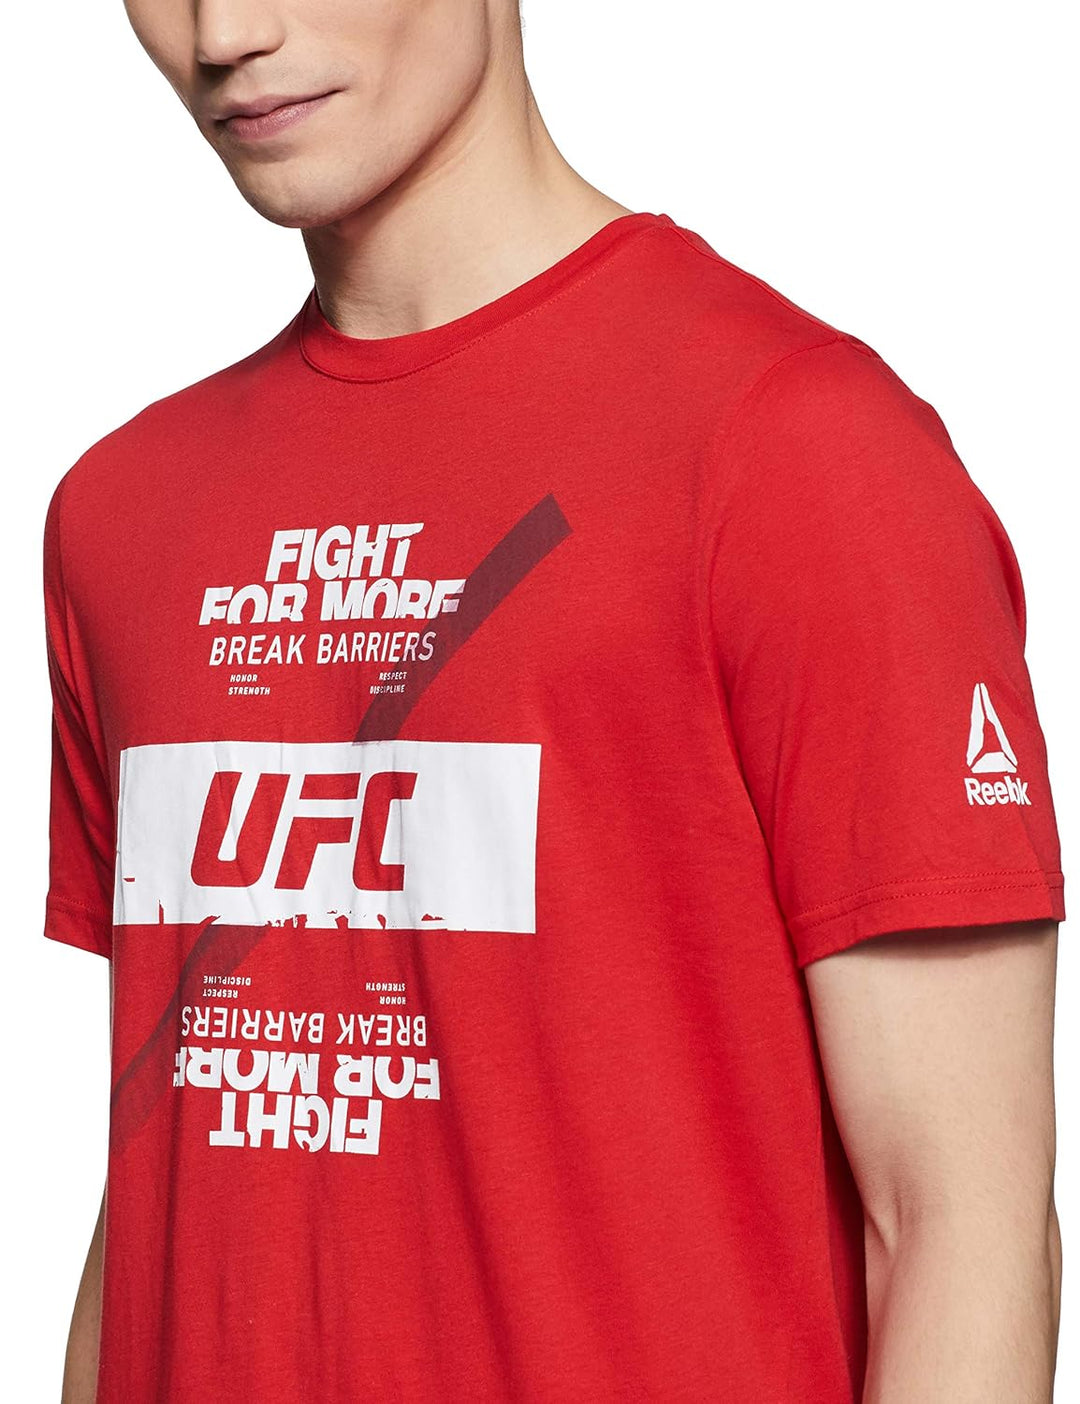 Reebok Men Adult Lifestyle UFC Fight For Yours Fan Tee Regular fit Cotton T-Shirt for All Season